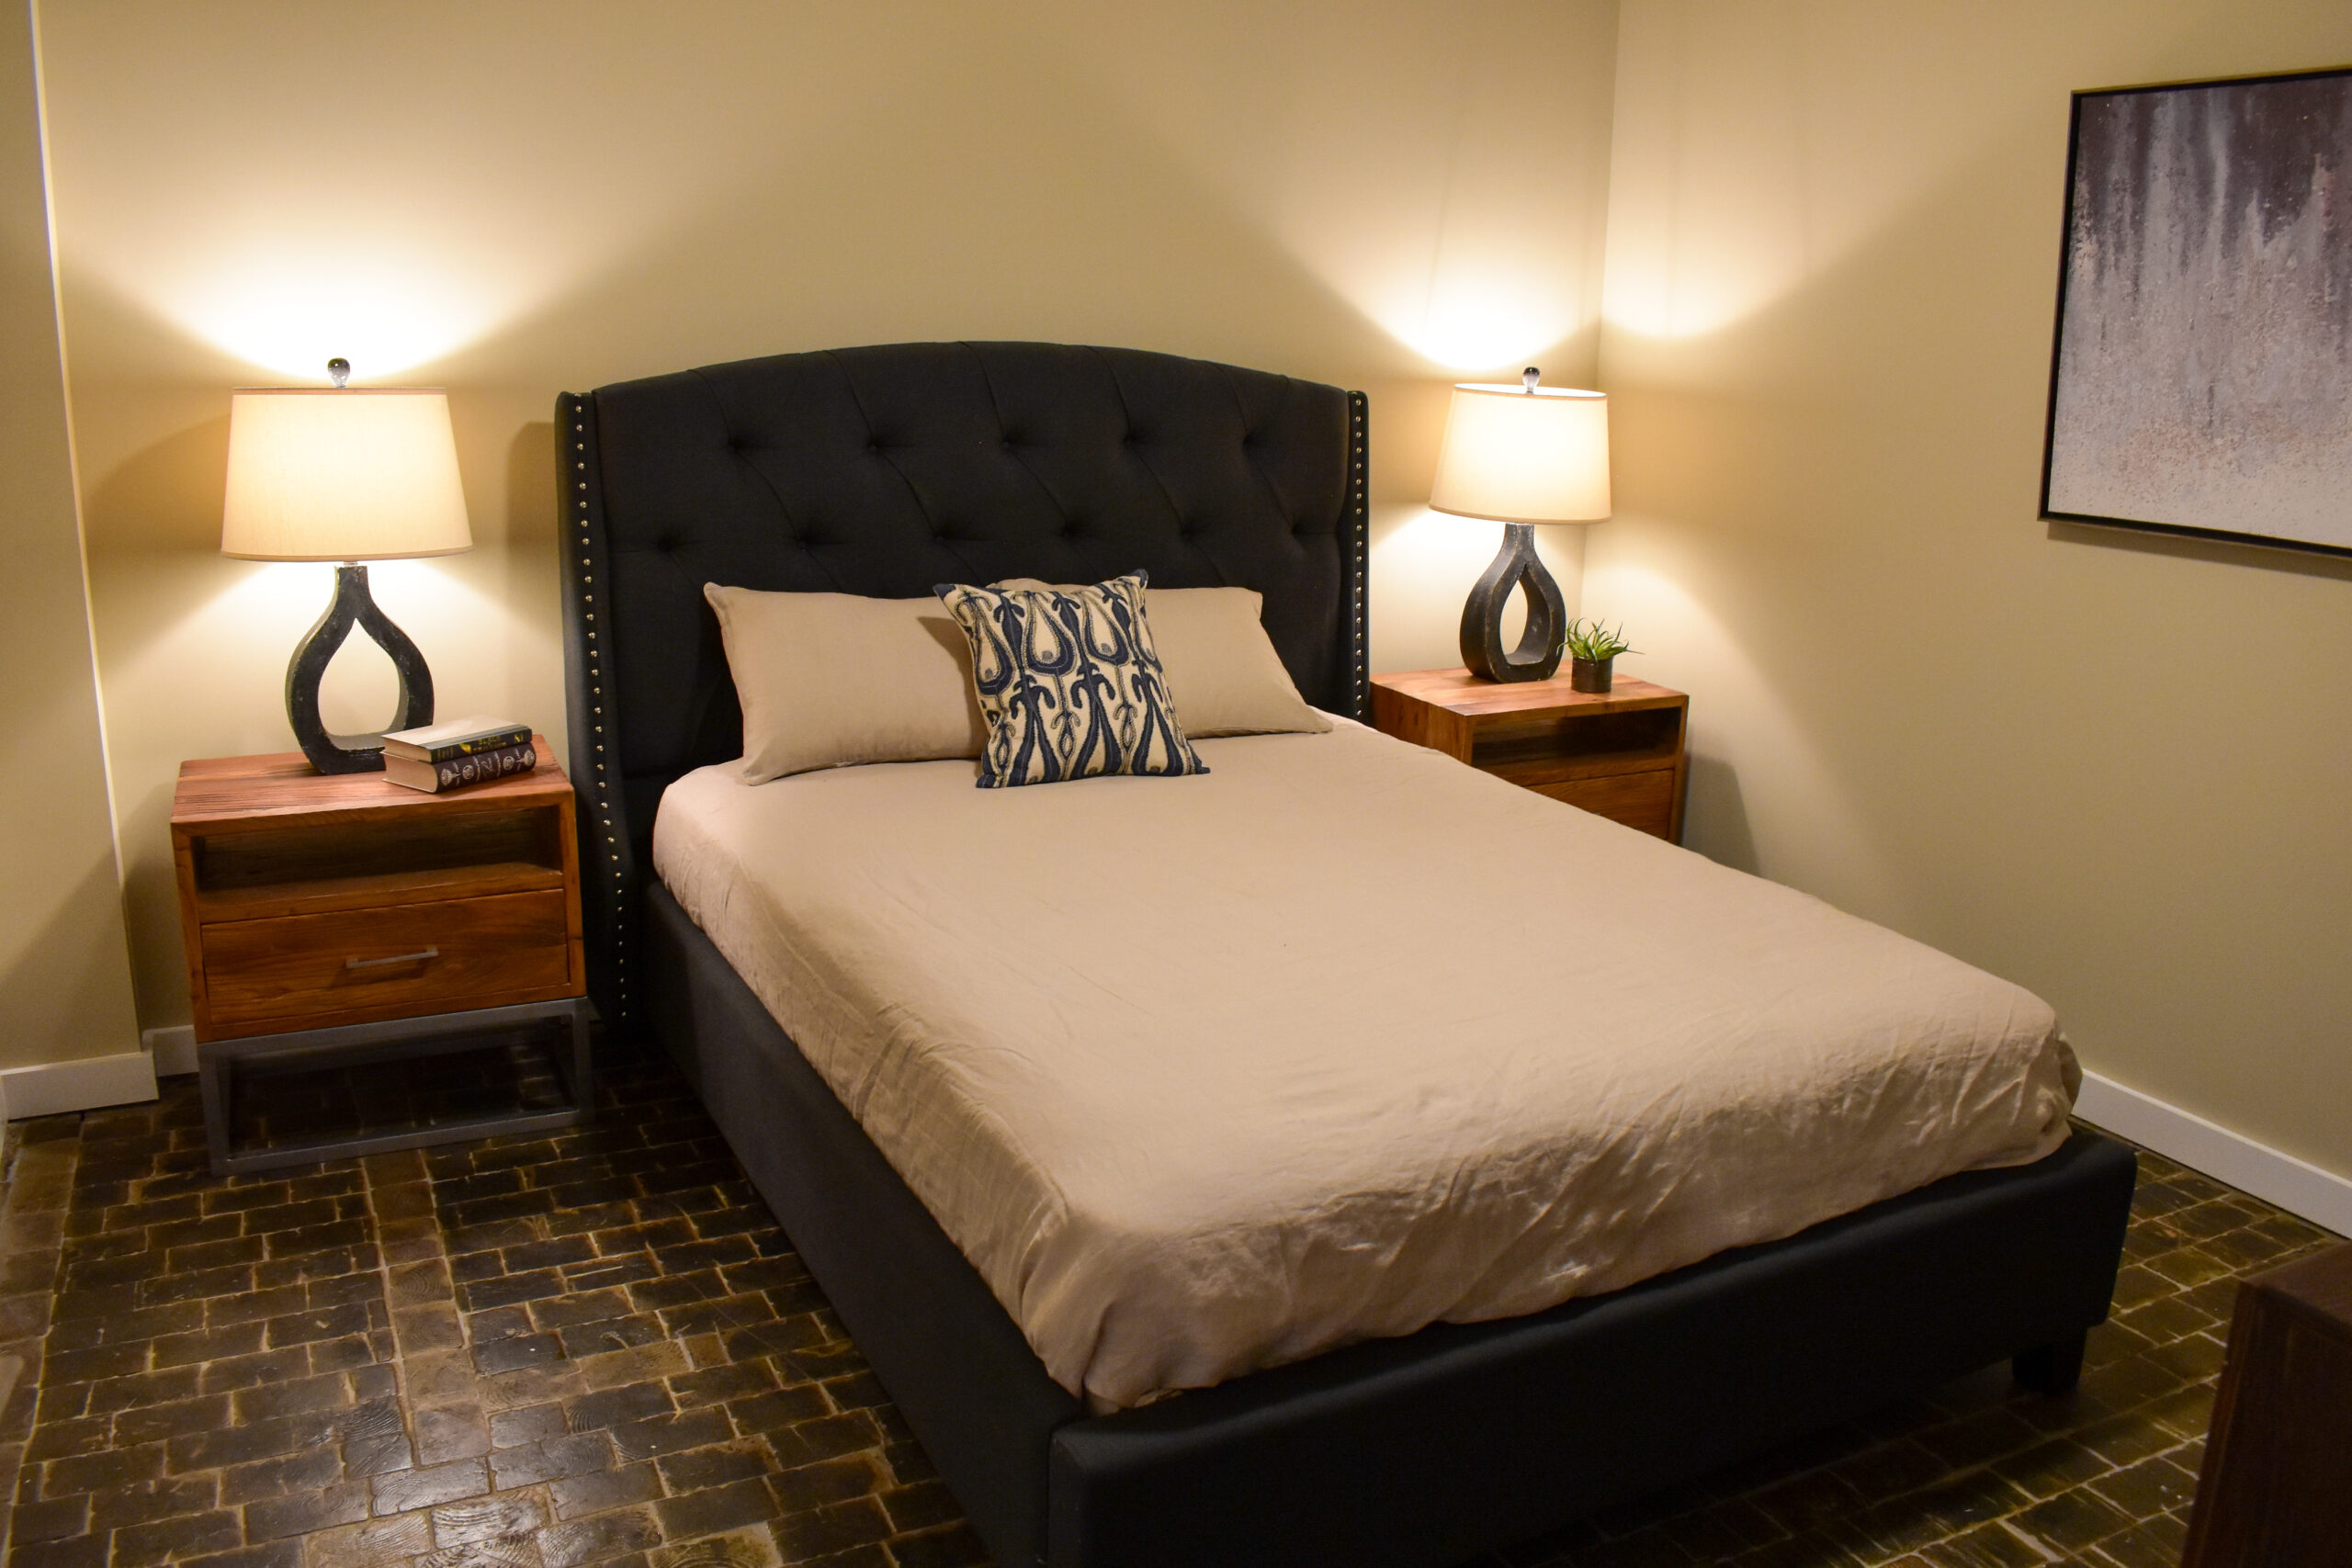 Bedroom - West Reading Apartments for Rent | Lofts @ Narrow